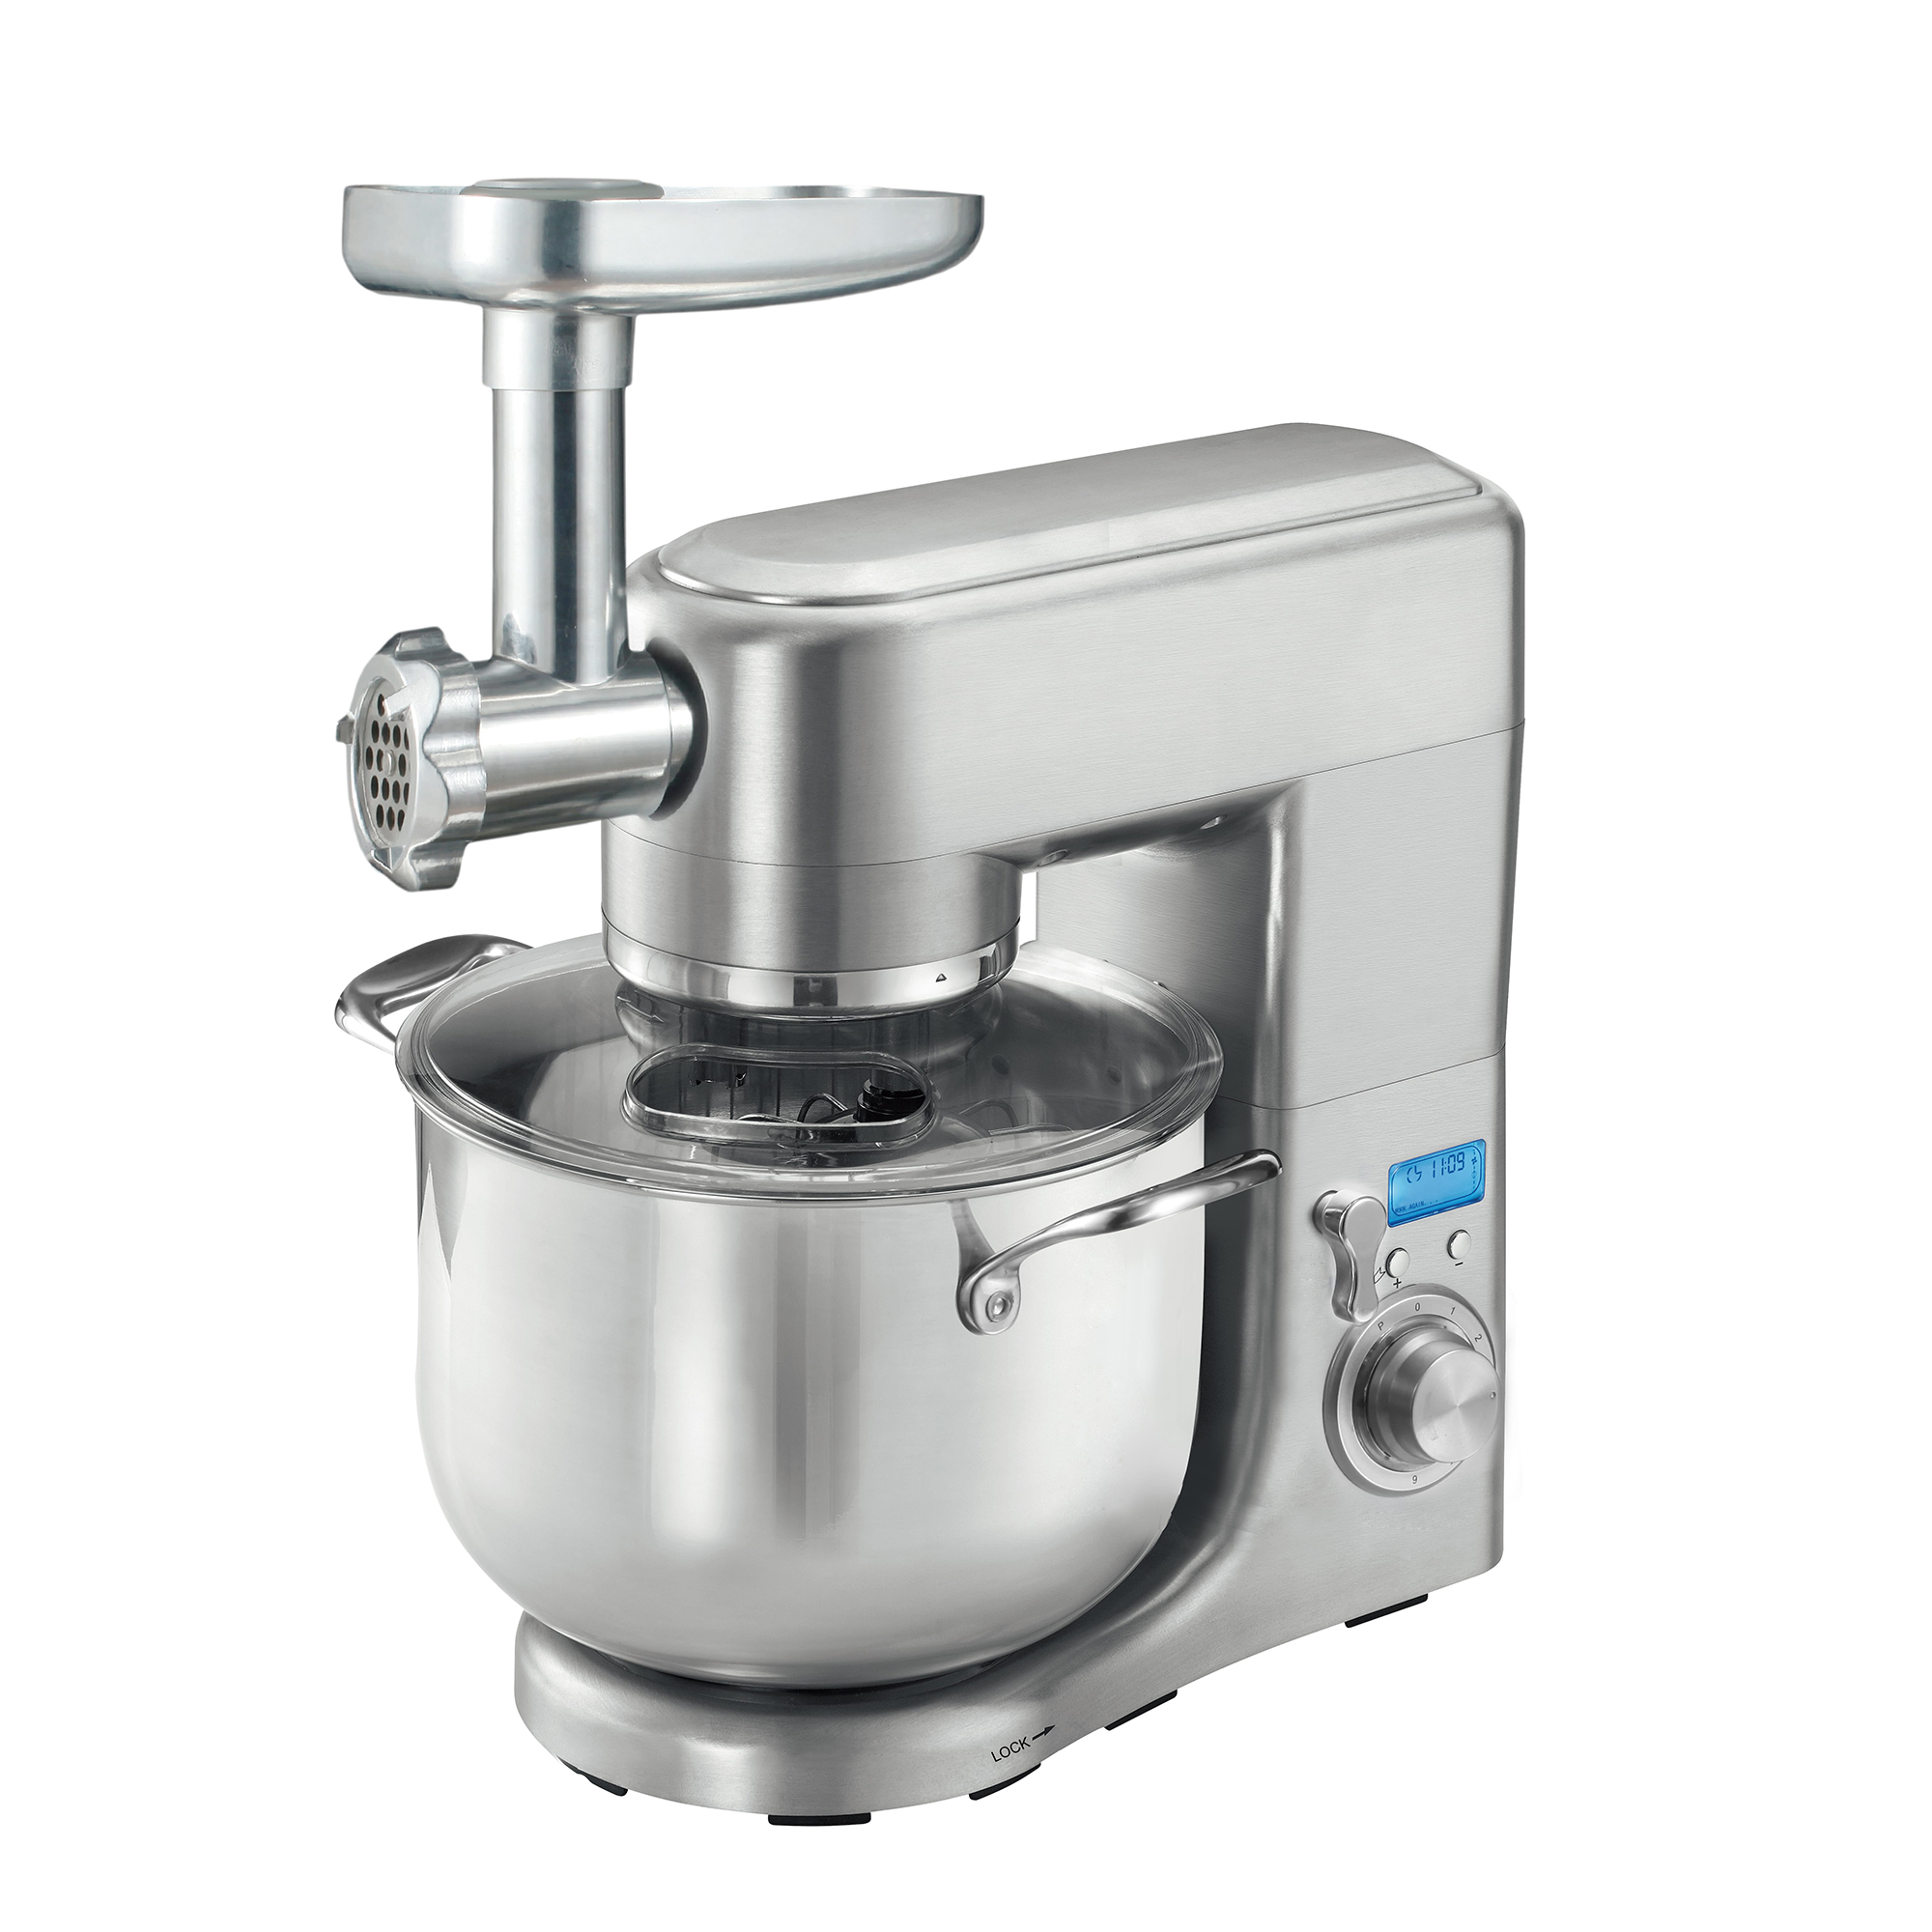 Professional kitchen stand mixer with meat grinder